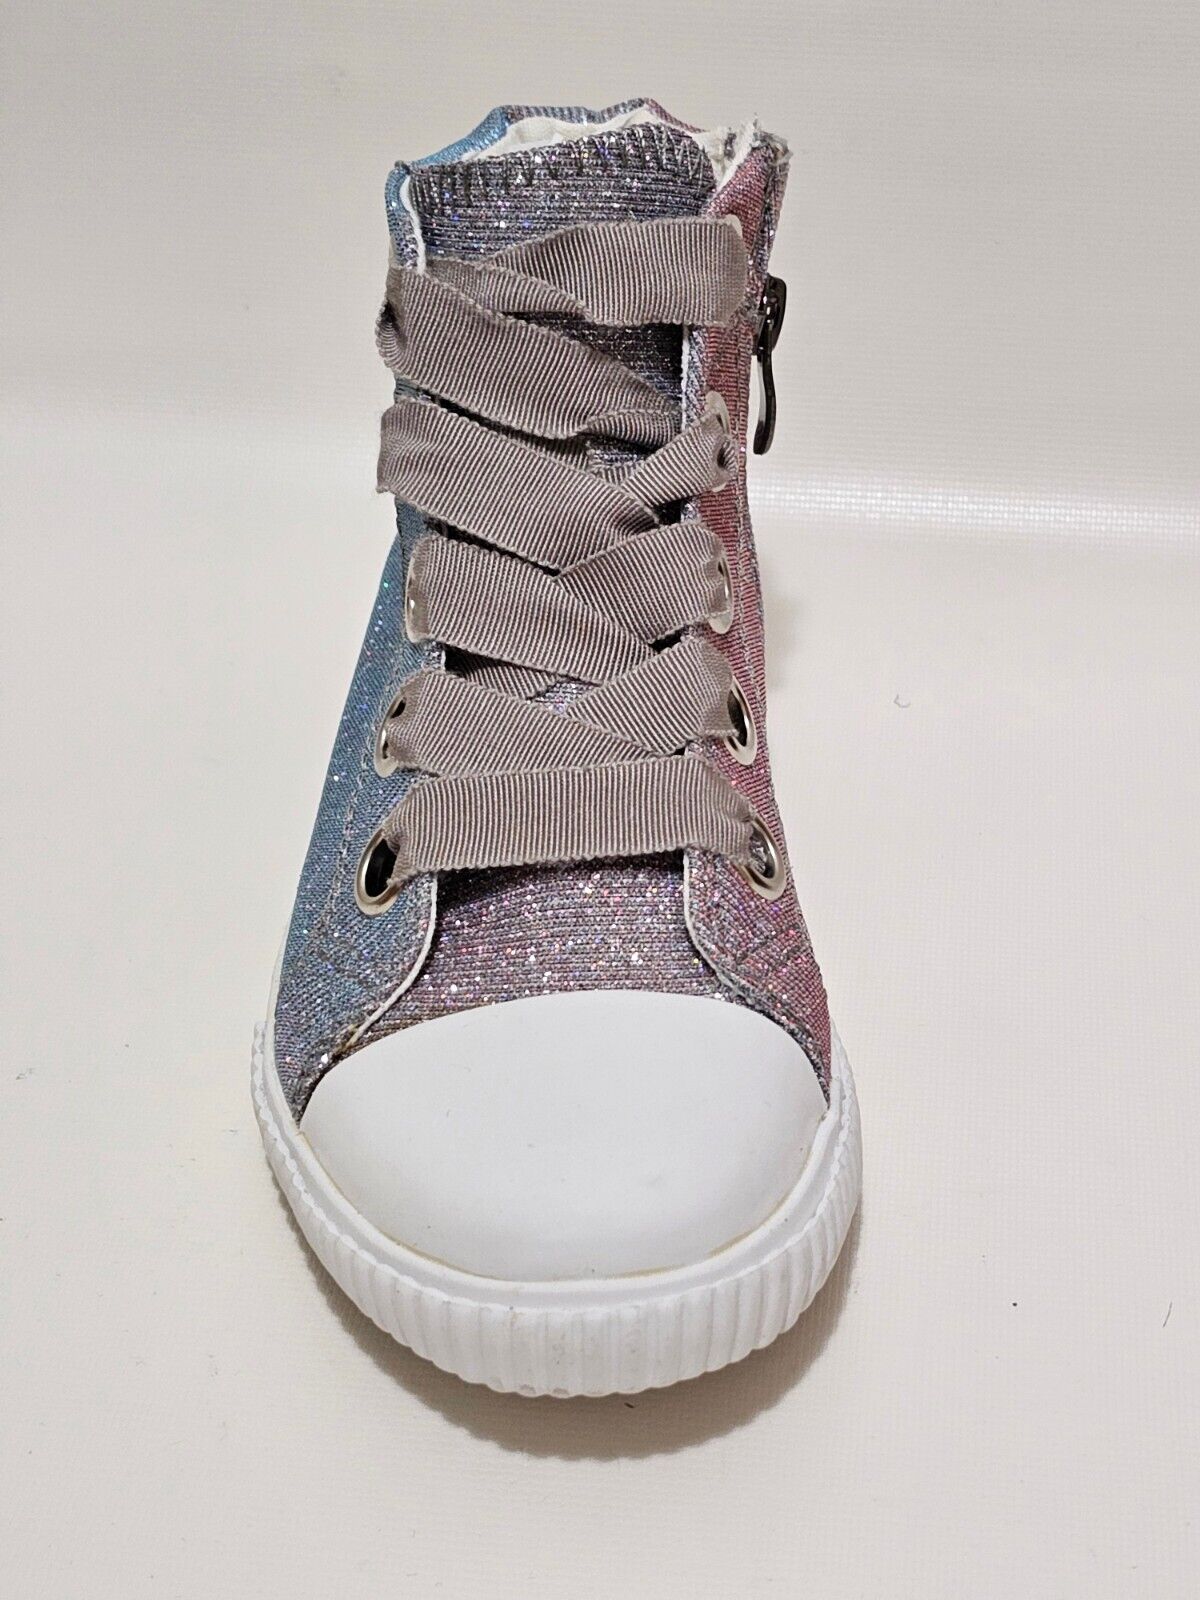 Shimmer Metallic Silver High Top Sneakers Girls Size 2